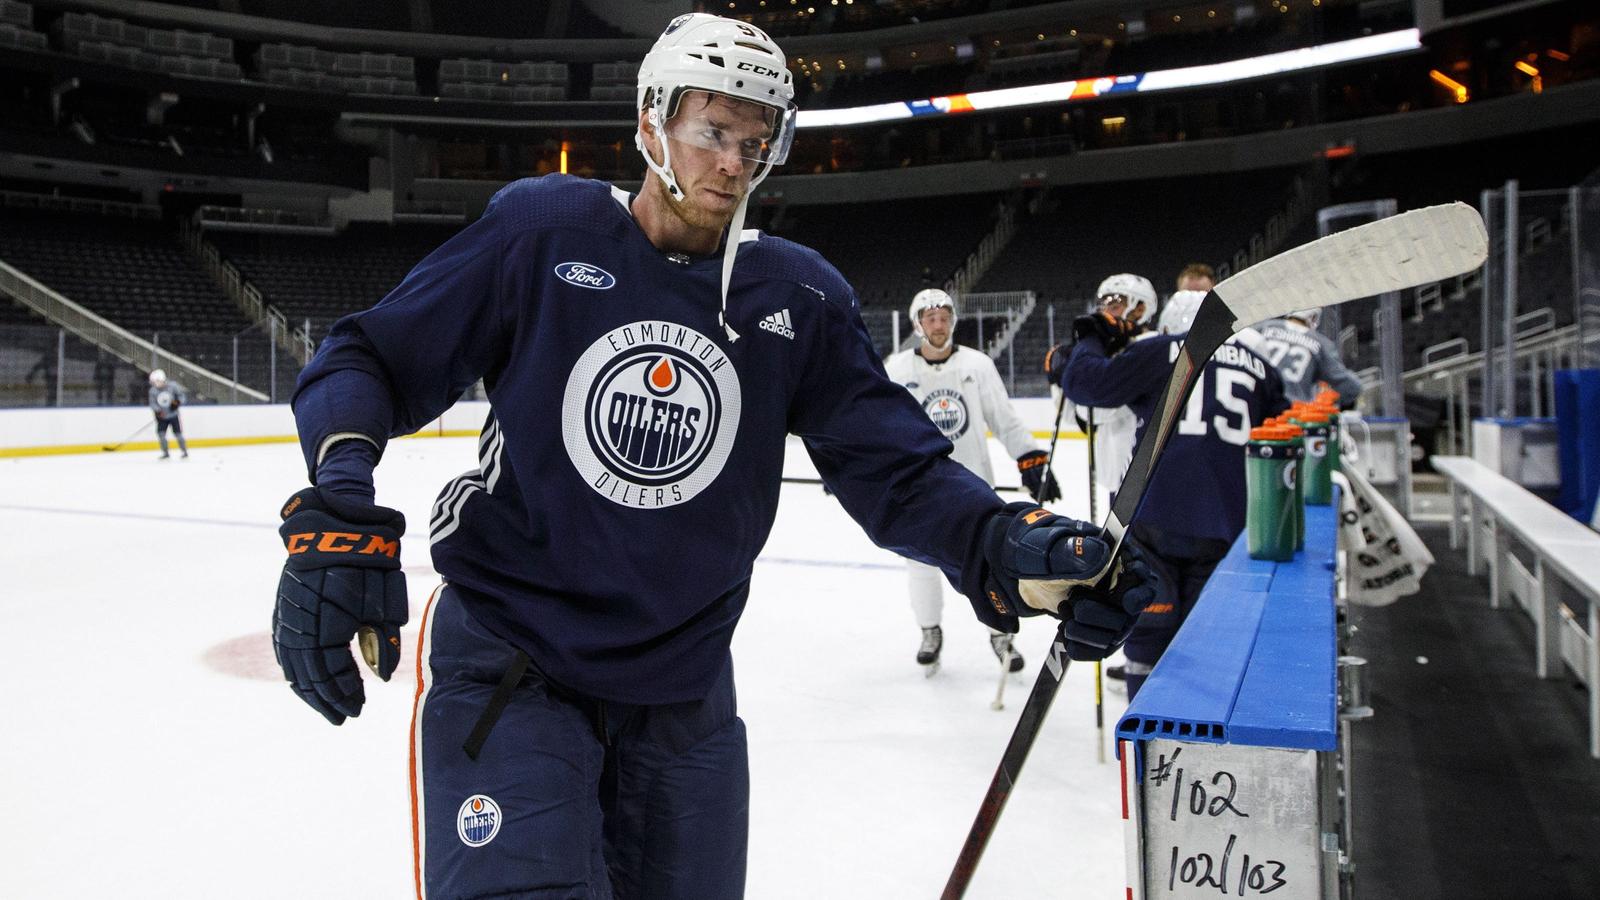 Players from Canadian teams, including McDavid, head back to Canada for training camp